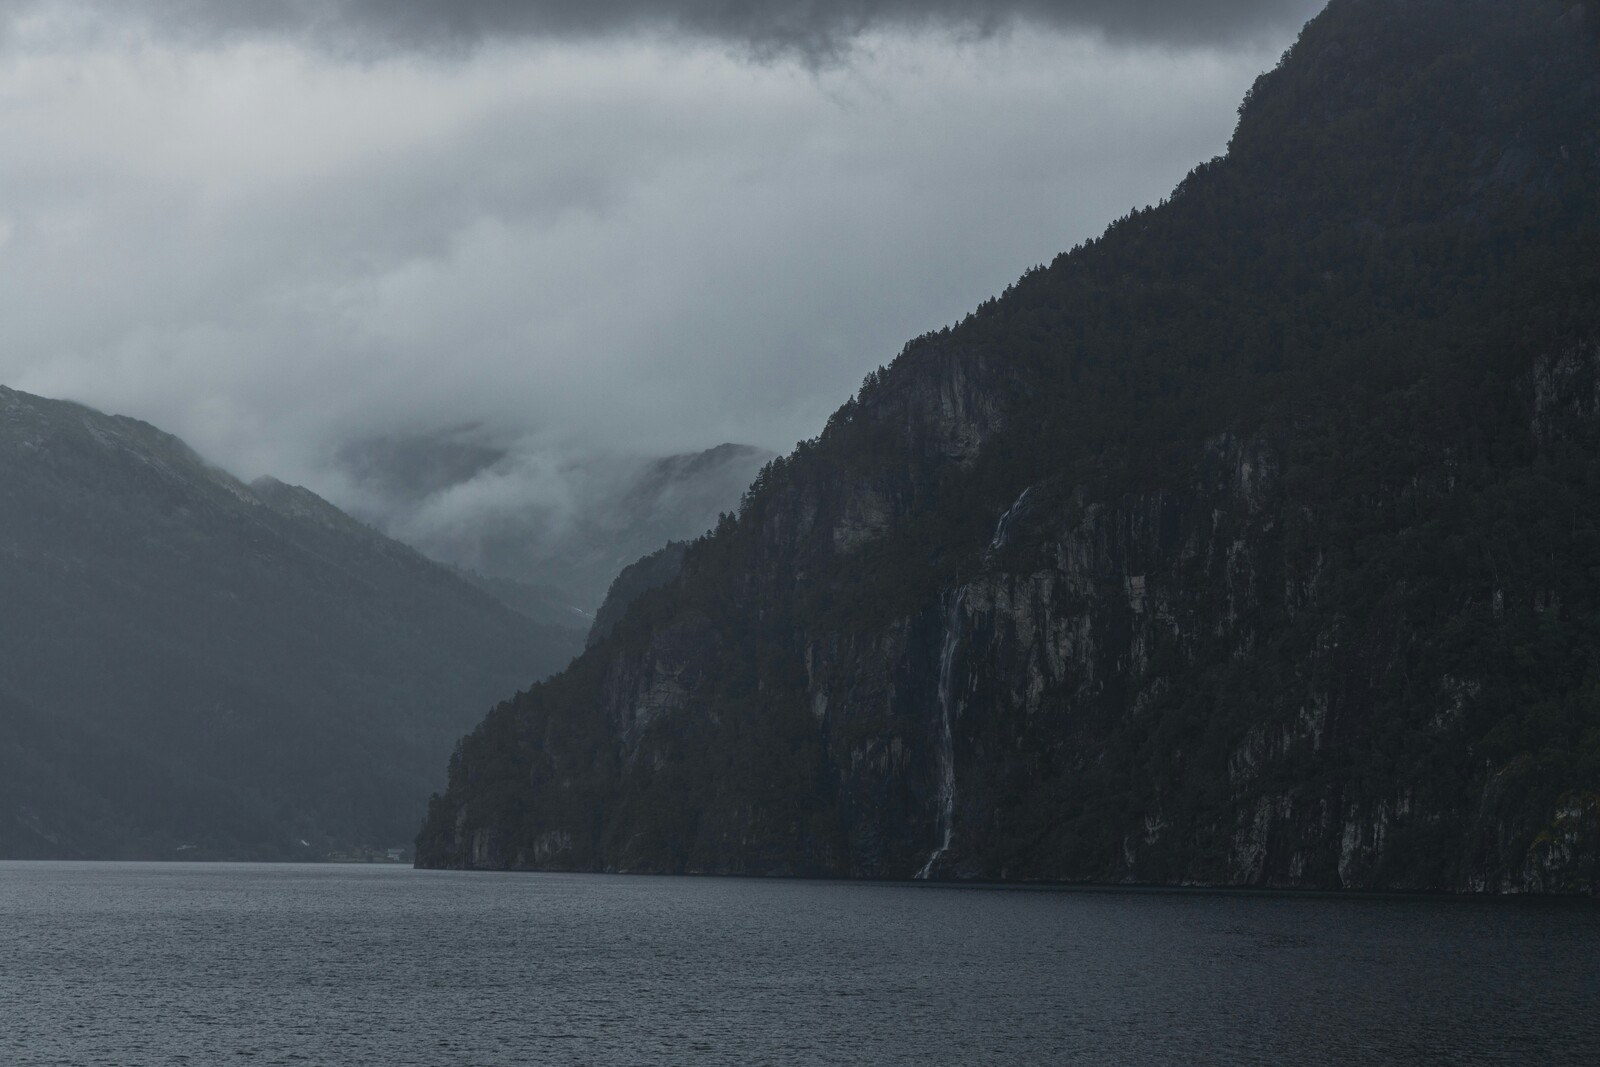 A dark sky over a rocky cliff descending into the grey waters of a fjord